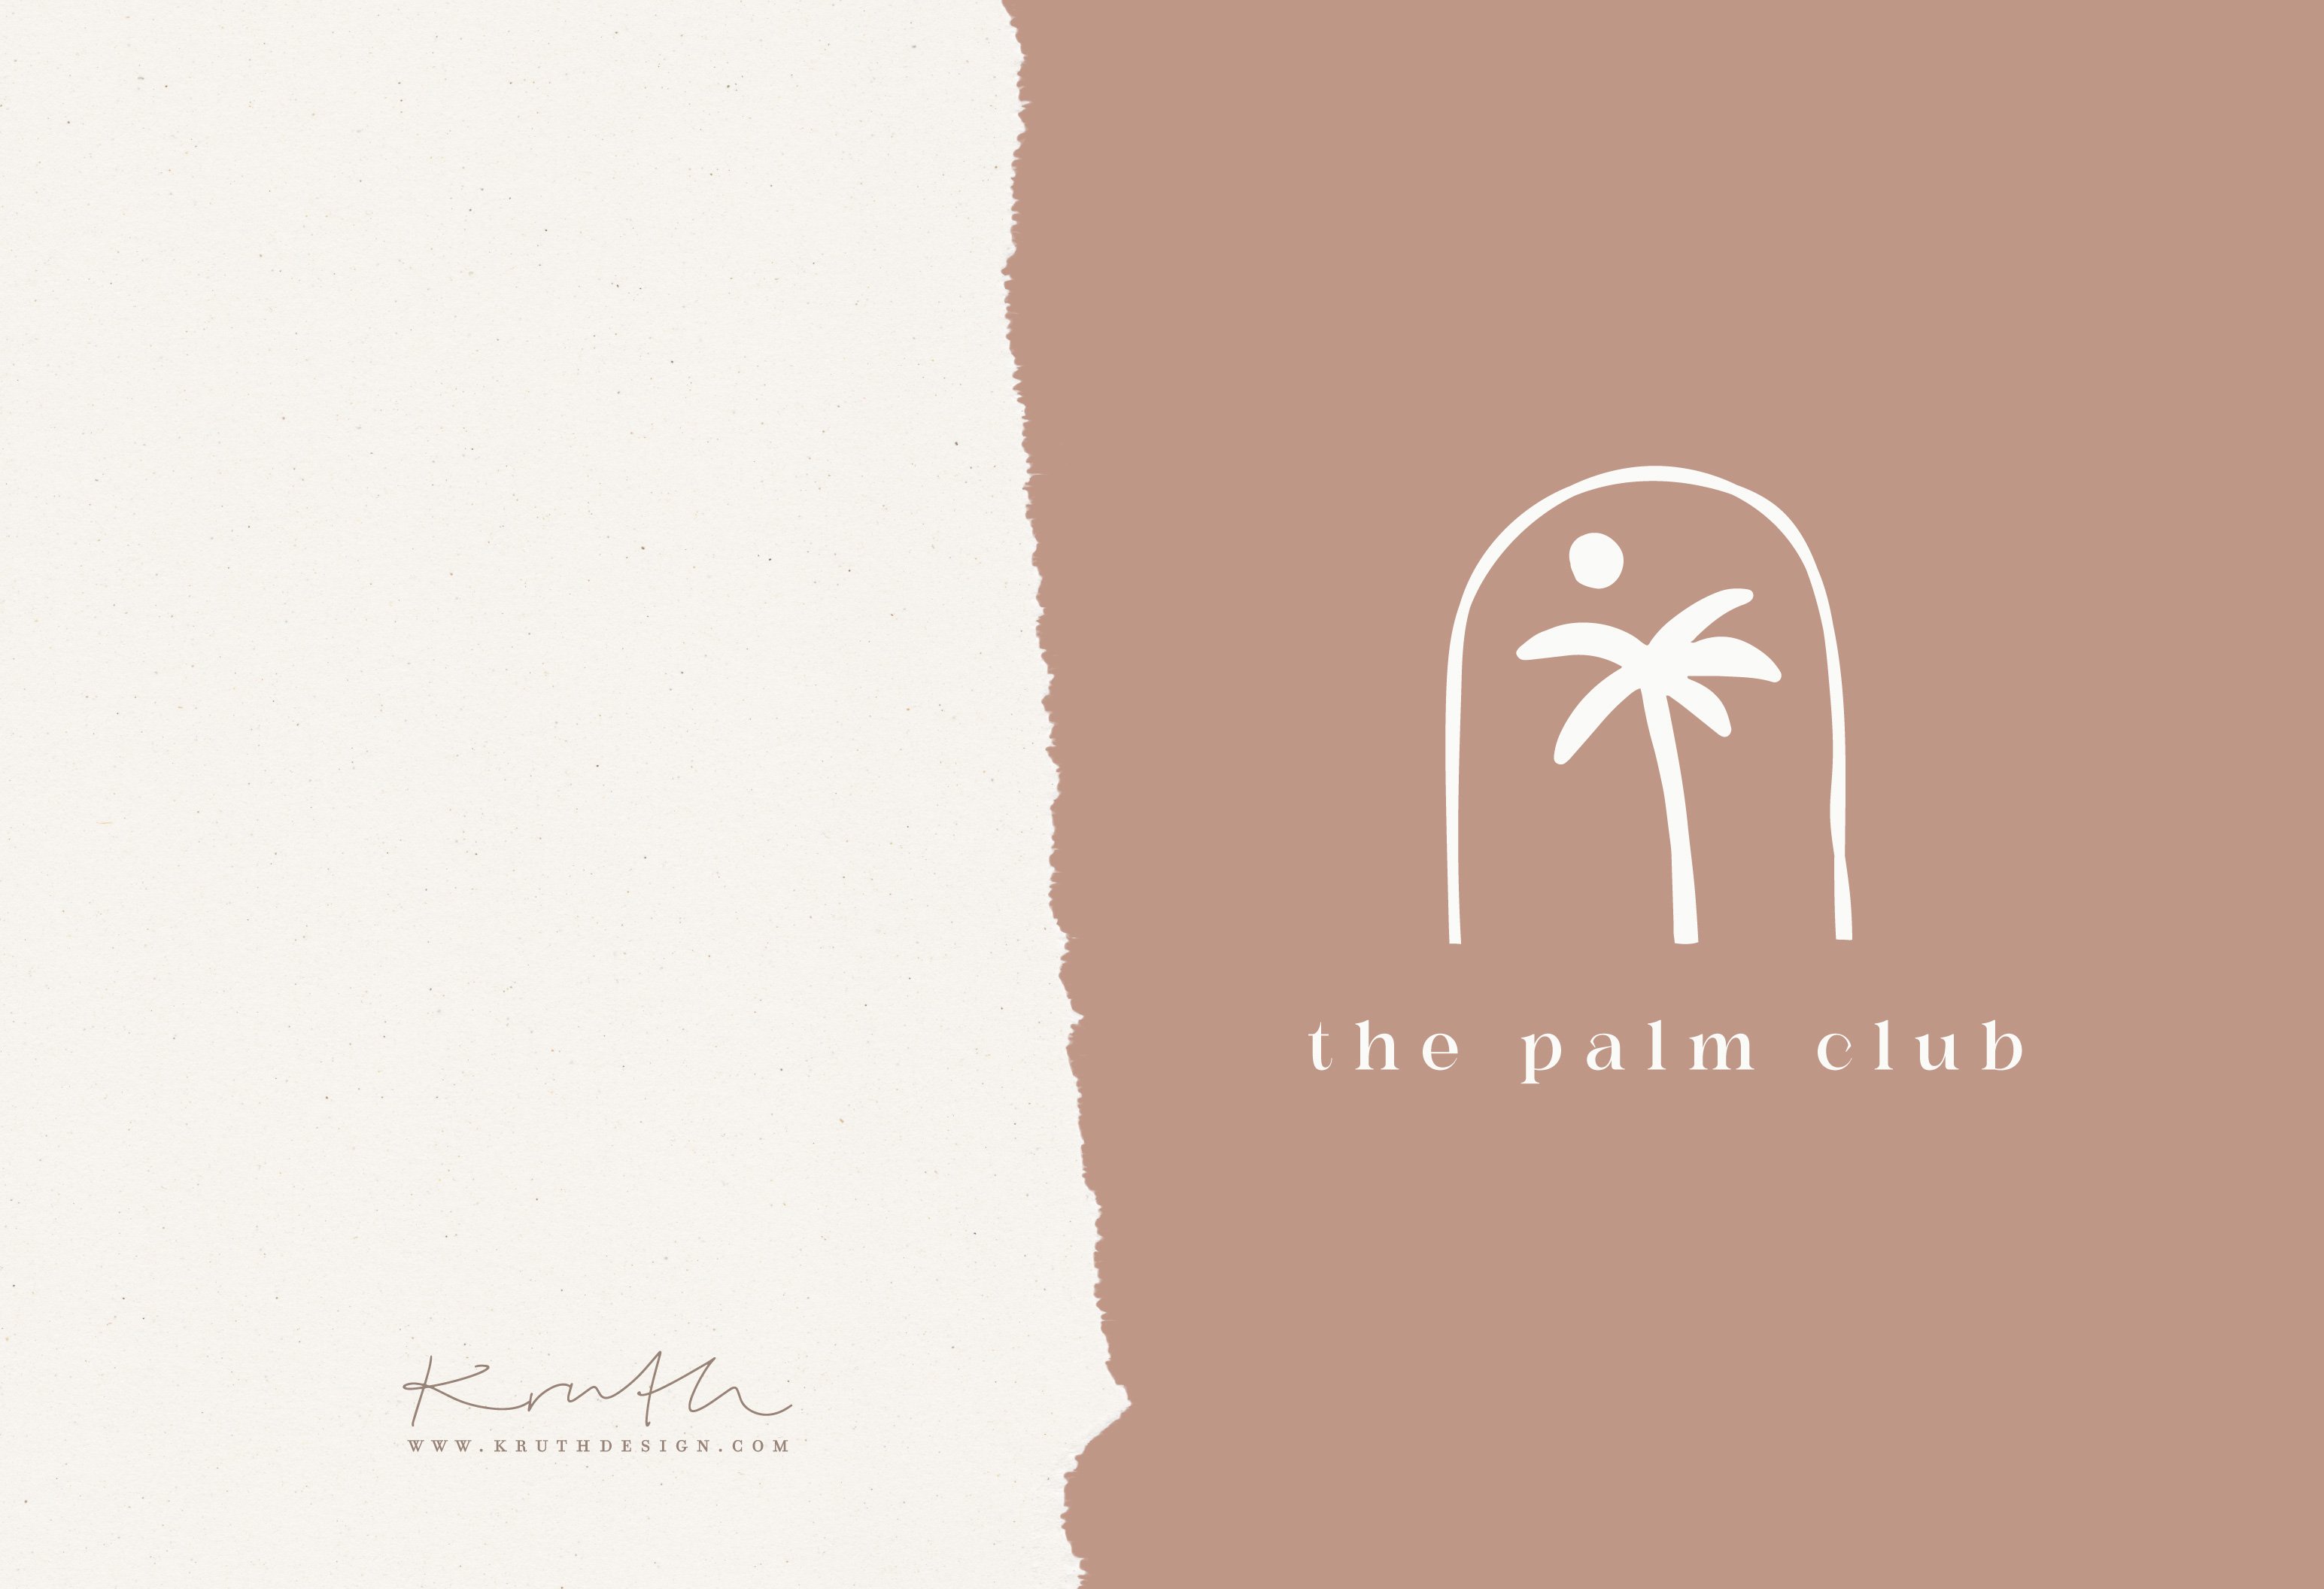 The palm club logo on a brown and white background.